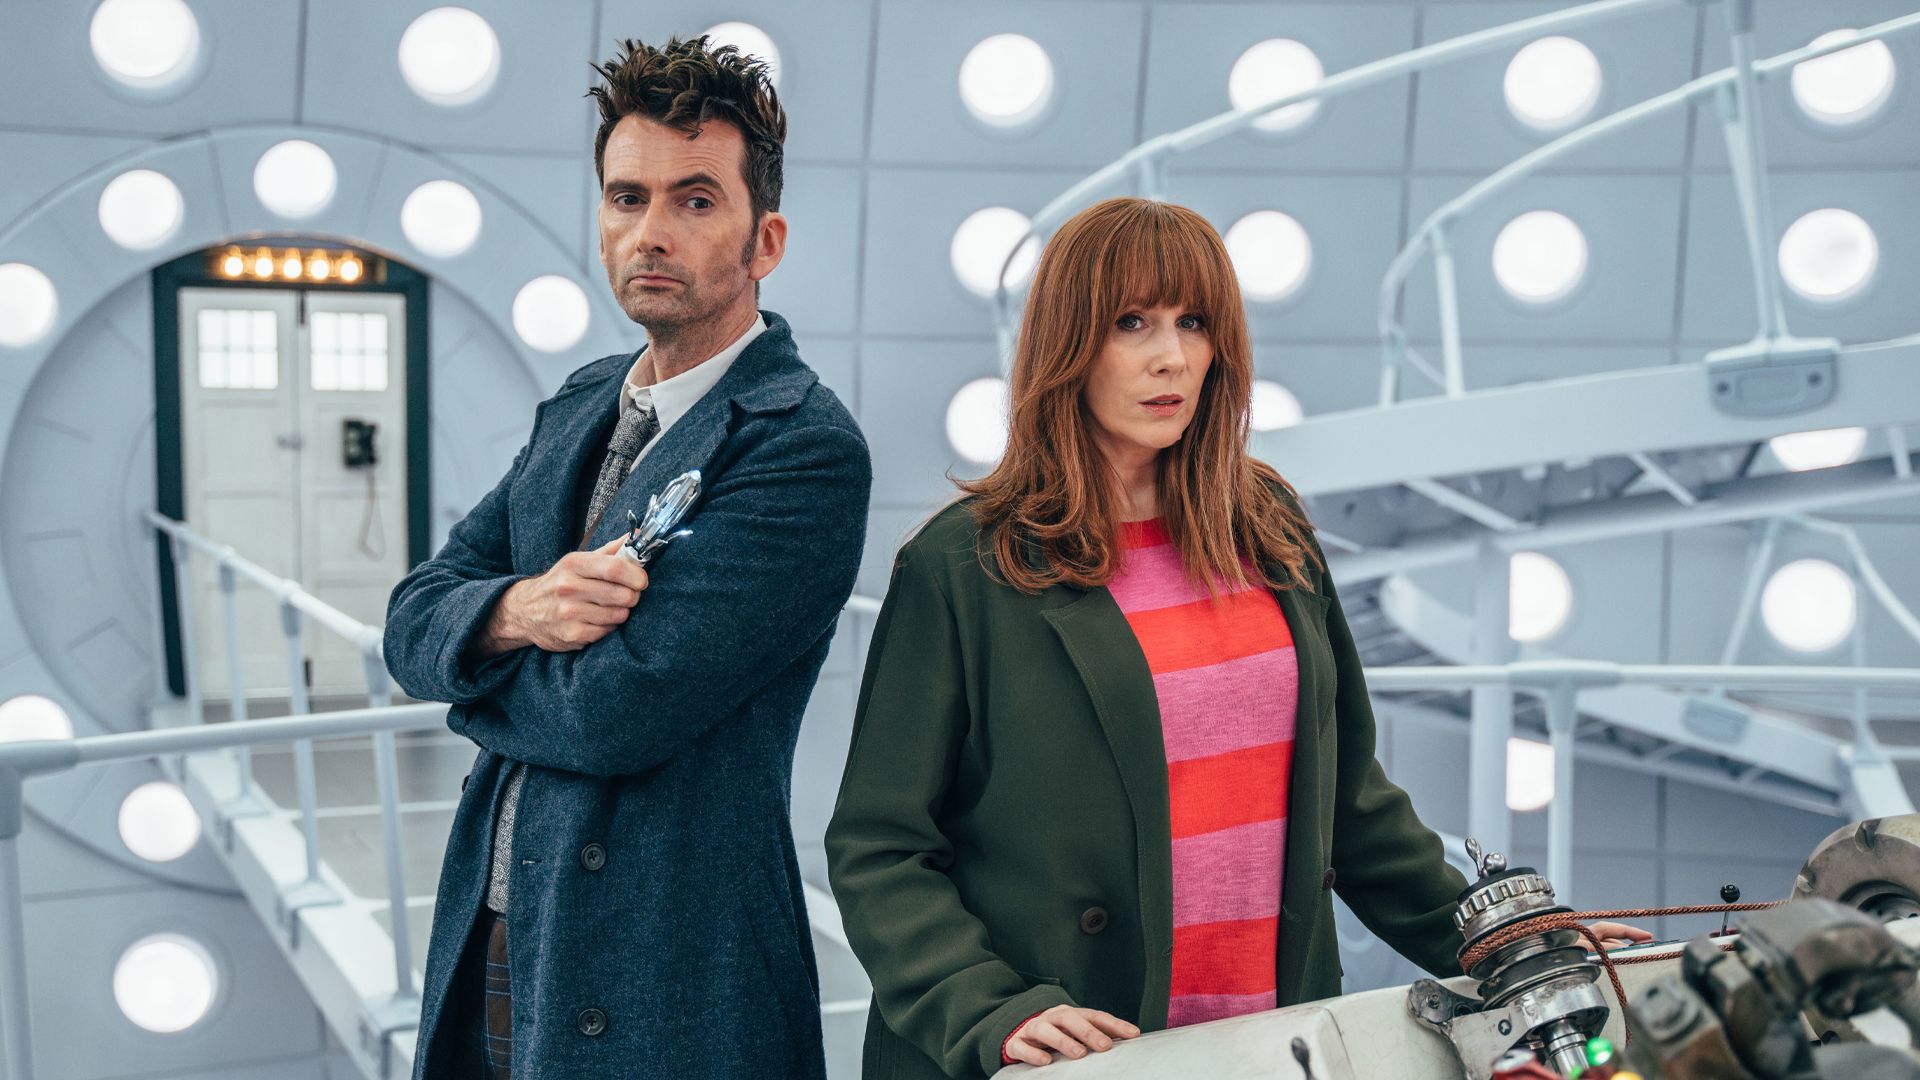 Doctor Who confirms air dates for 3 specials with David Tennant